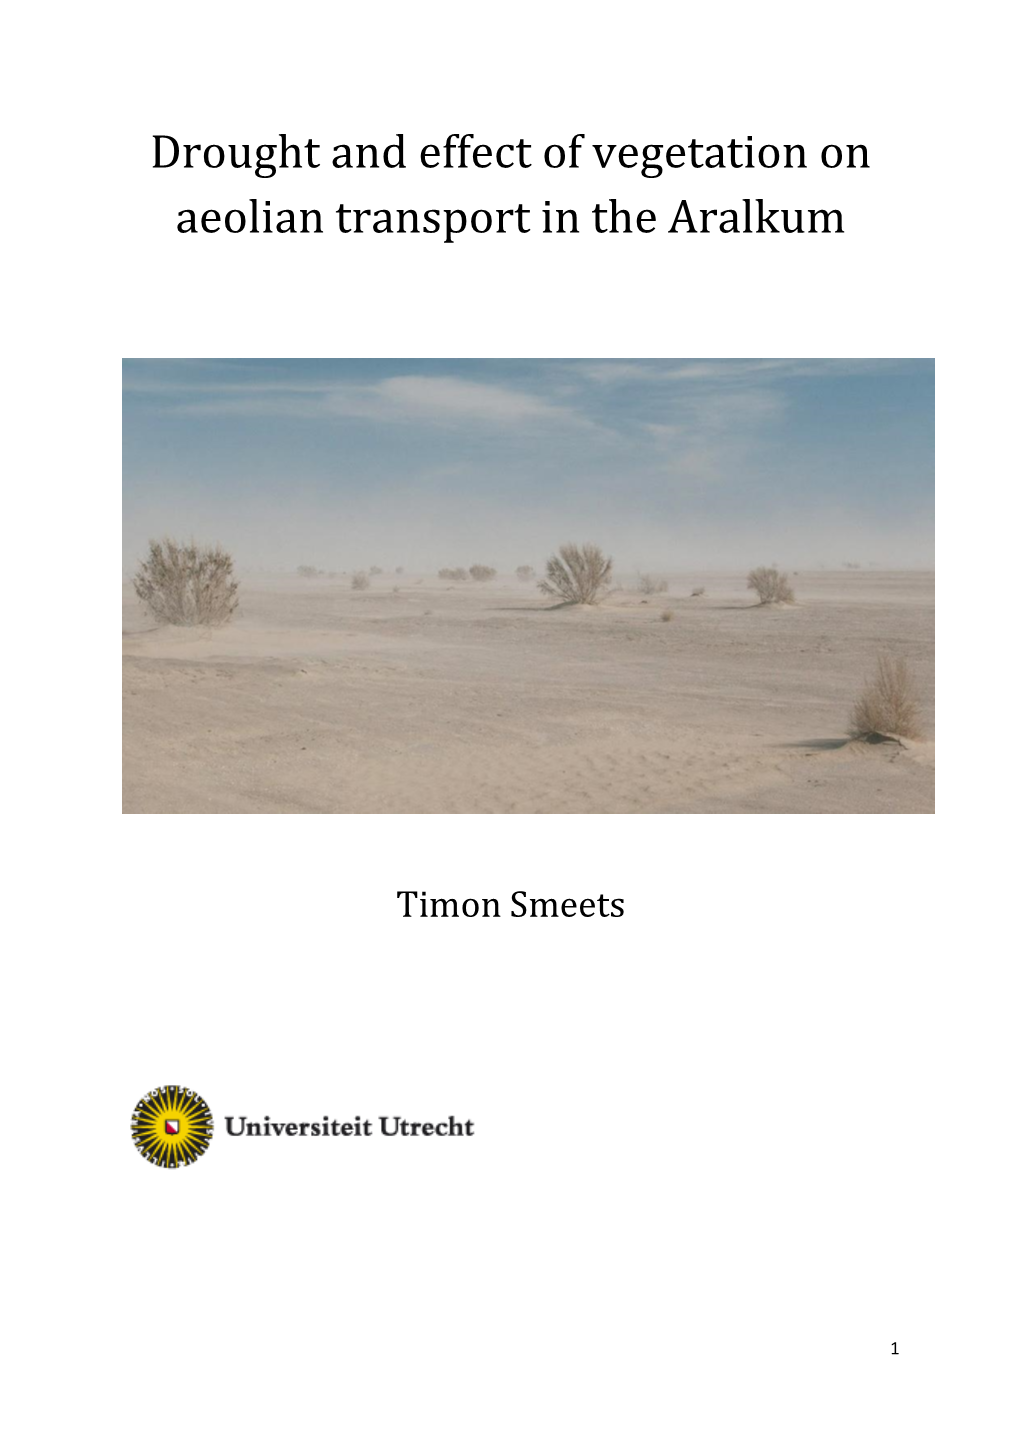 Drought and Effect of Vegetation on Aeolian Transport in the Aralkum